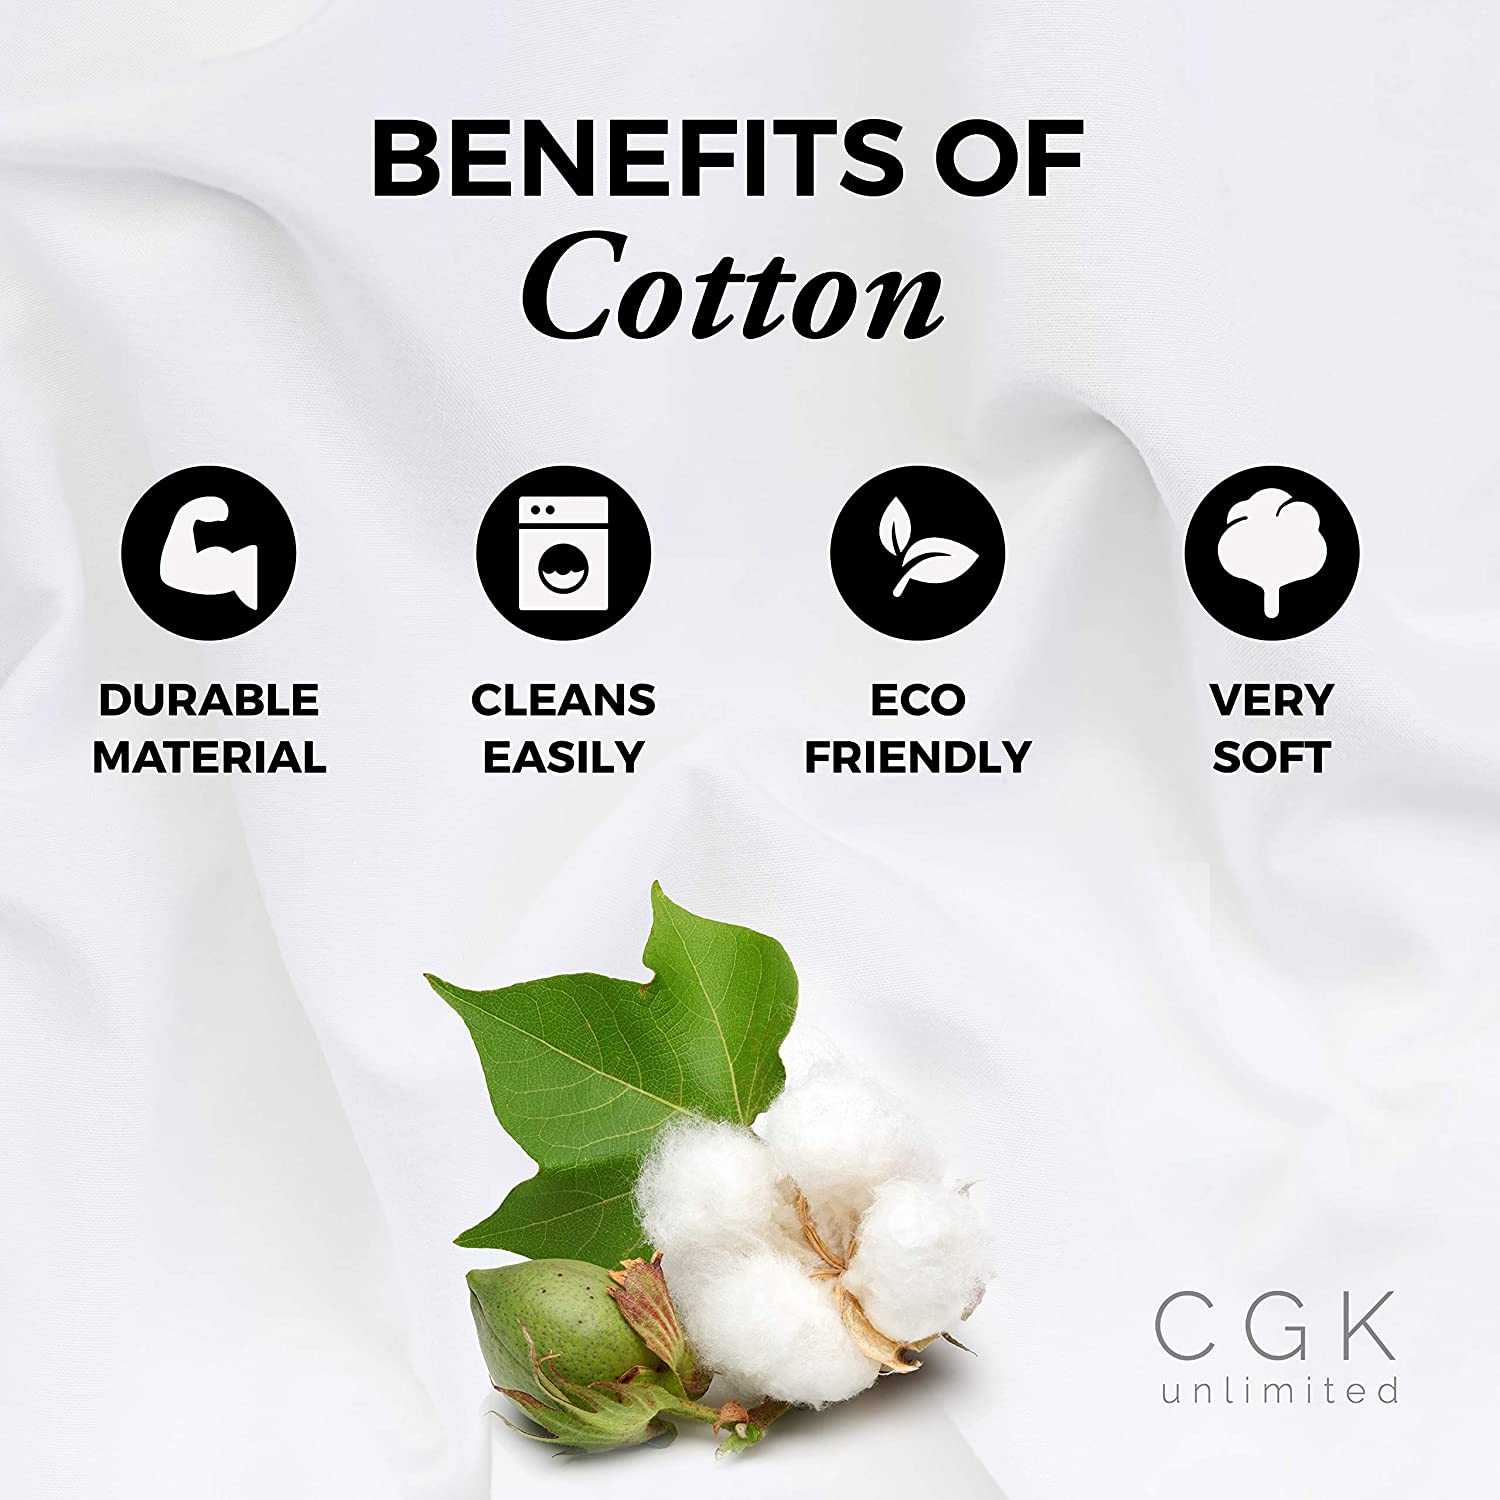 tes Benefits of Cotton: Durable, cleans easy, eco friendly and very soft